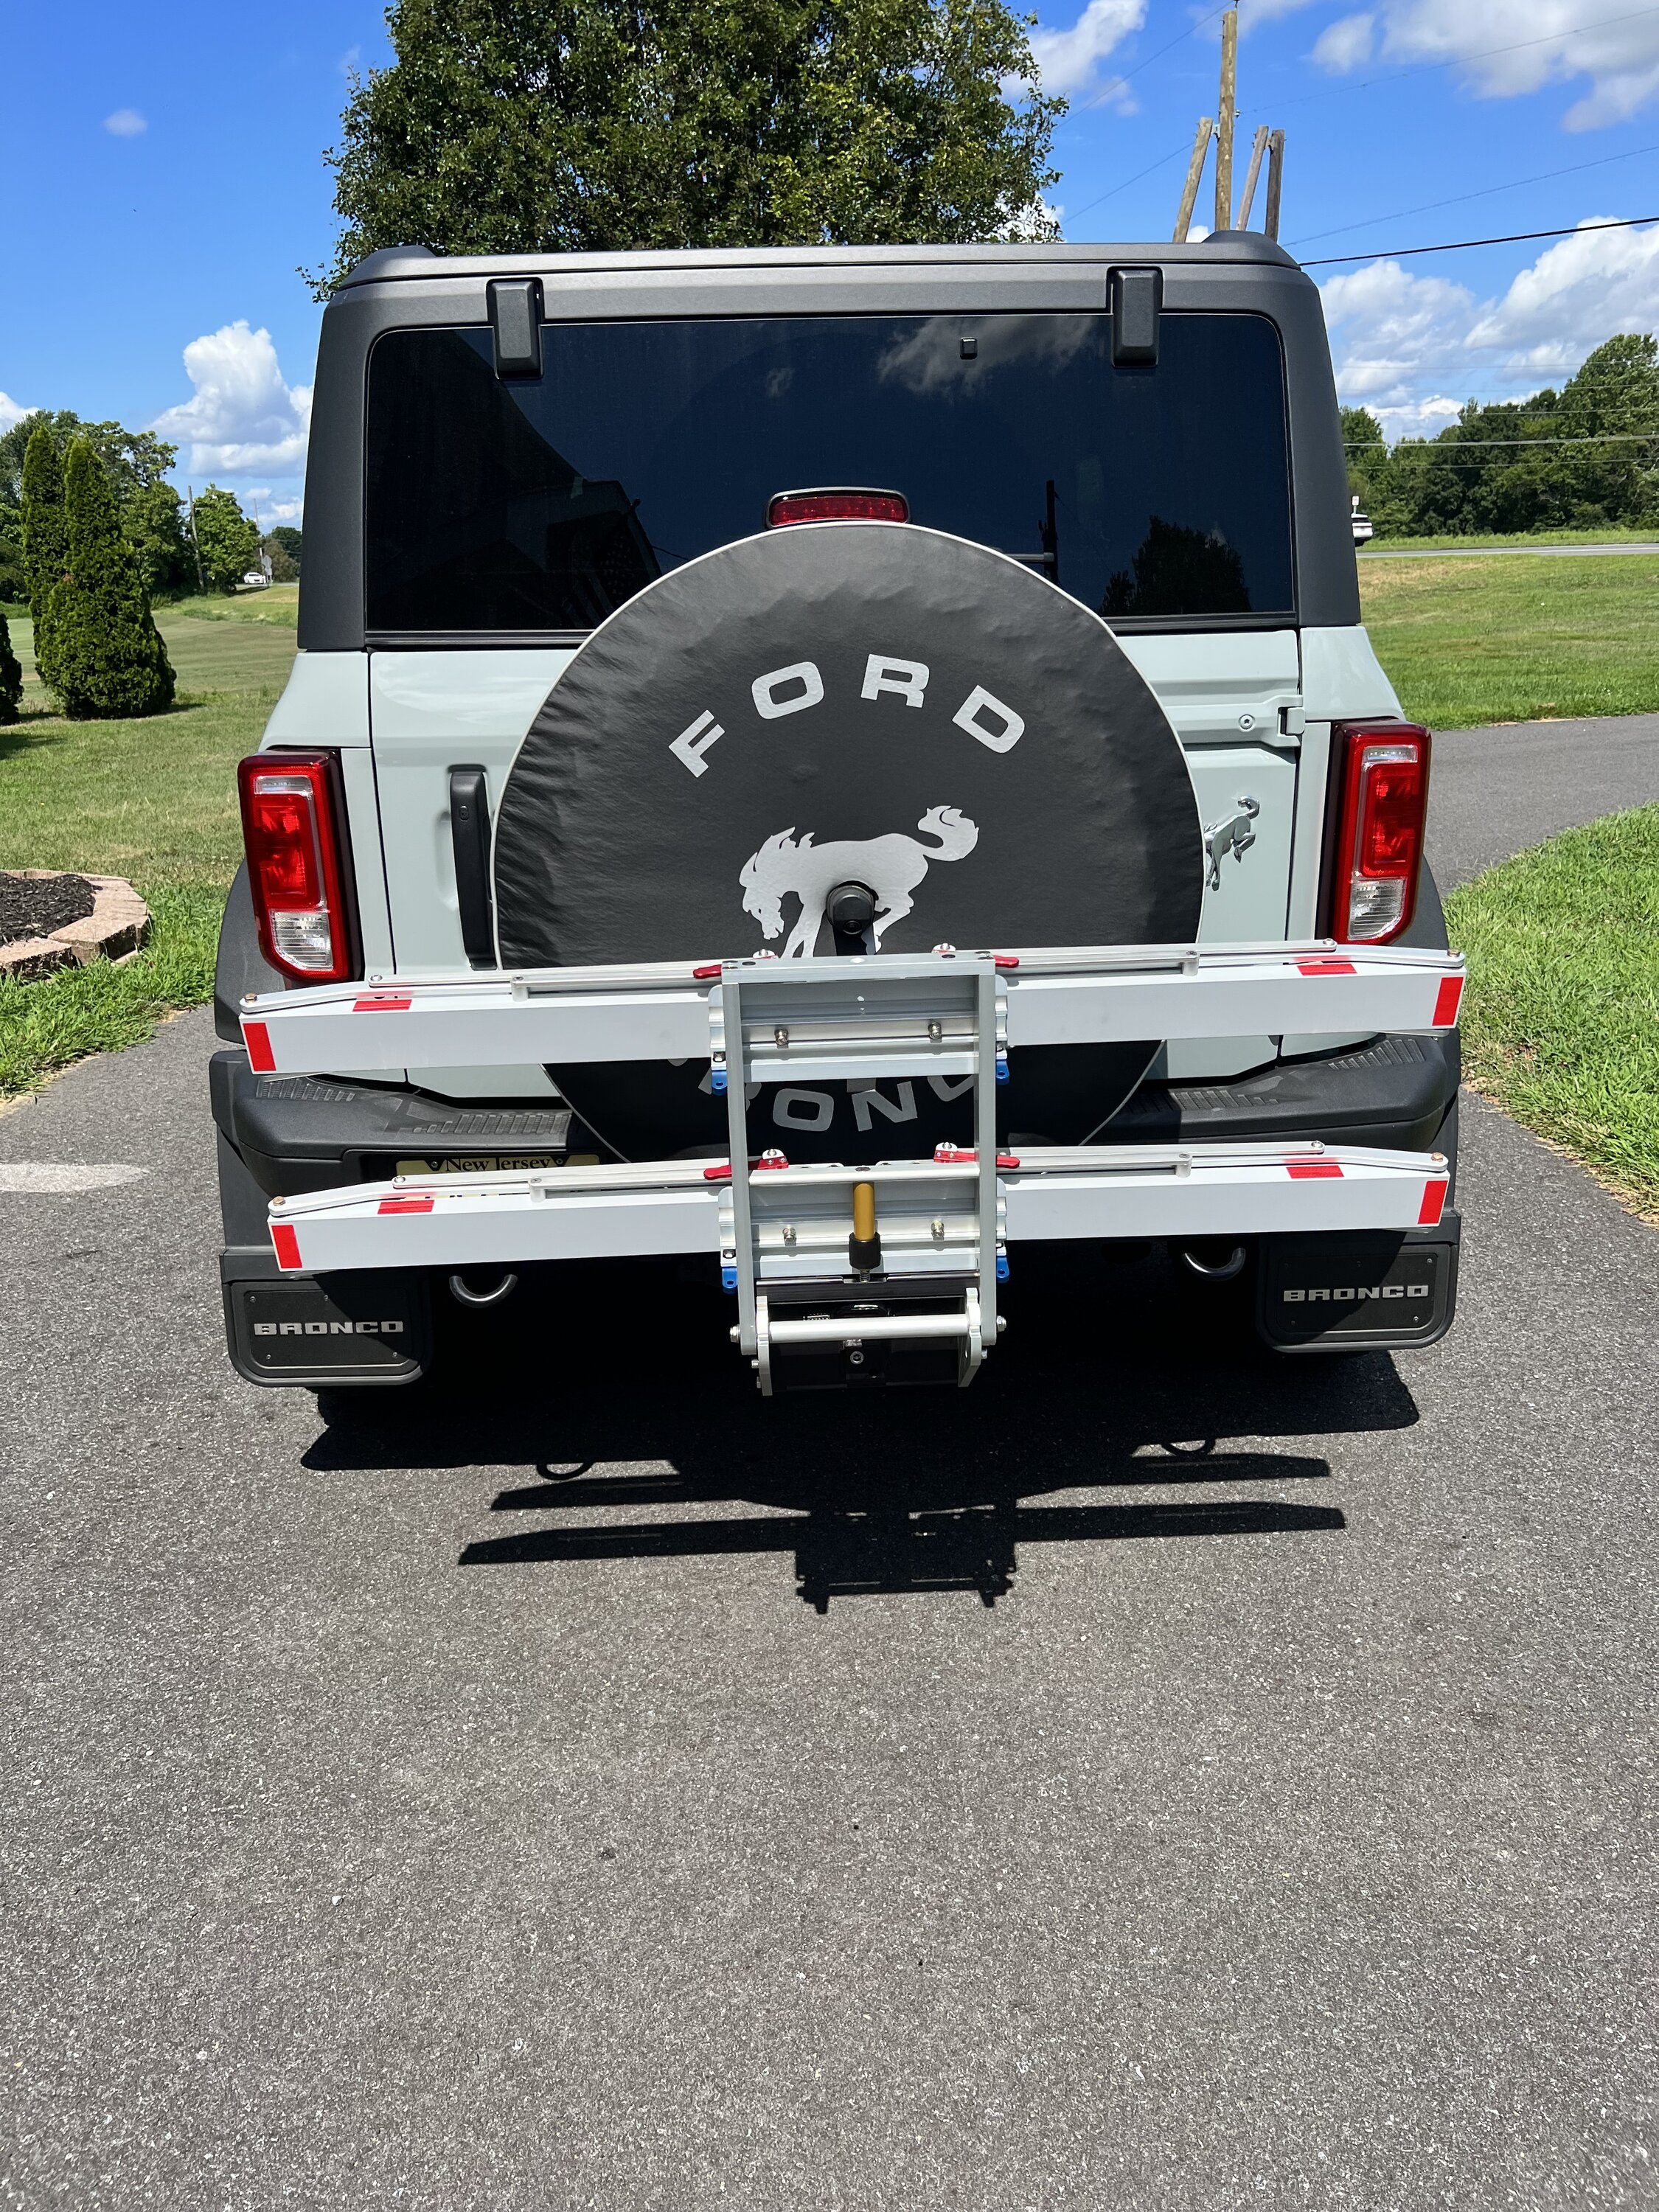 Ford Bronco Bike Rack that clears without an extension? 9F7AC337-A605-4035-923D-4B535AE86AD9